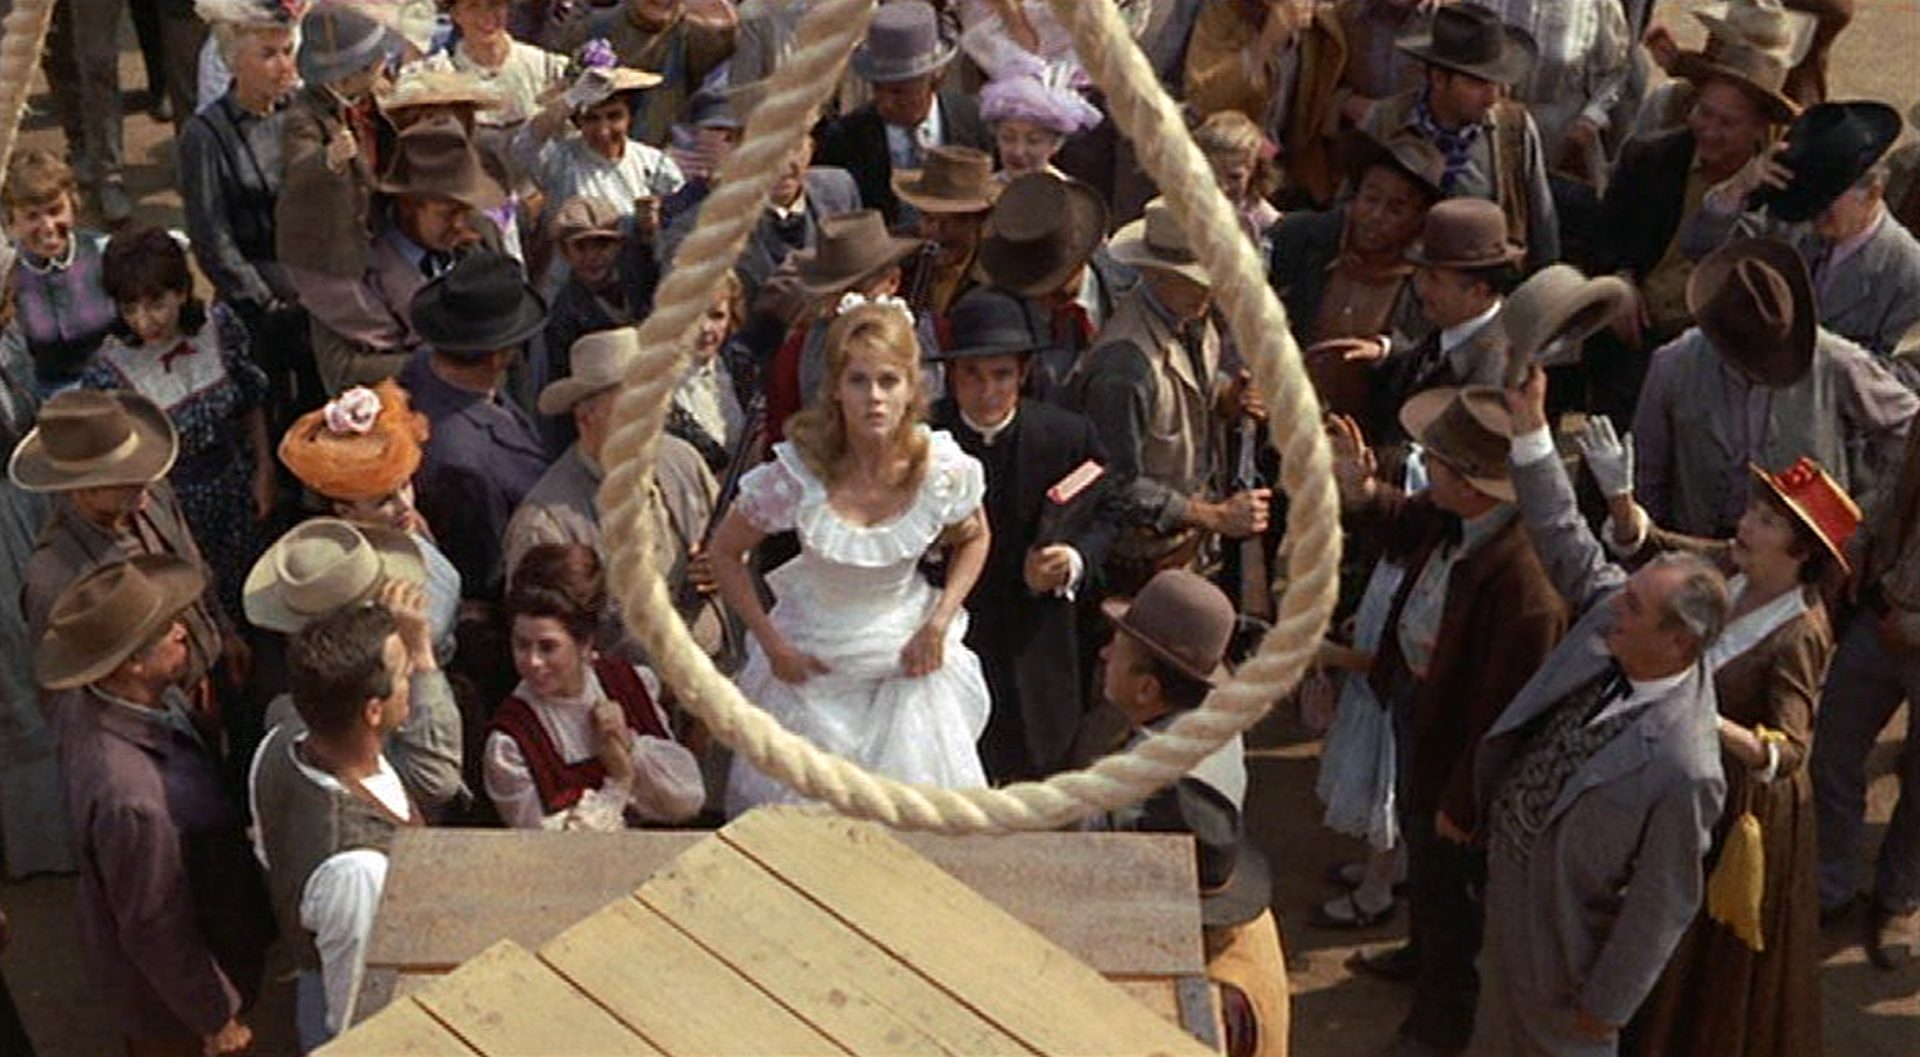 View through gallows noose of Cat Ballou in white dress amidst lynching audience.